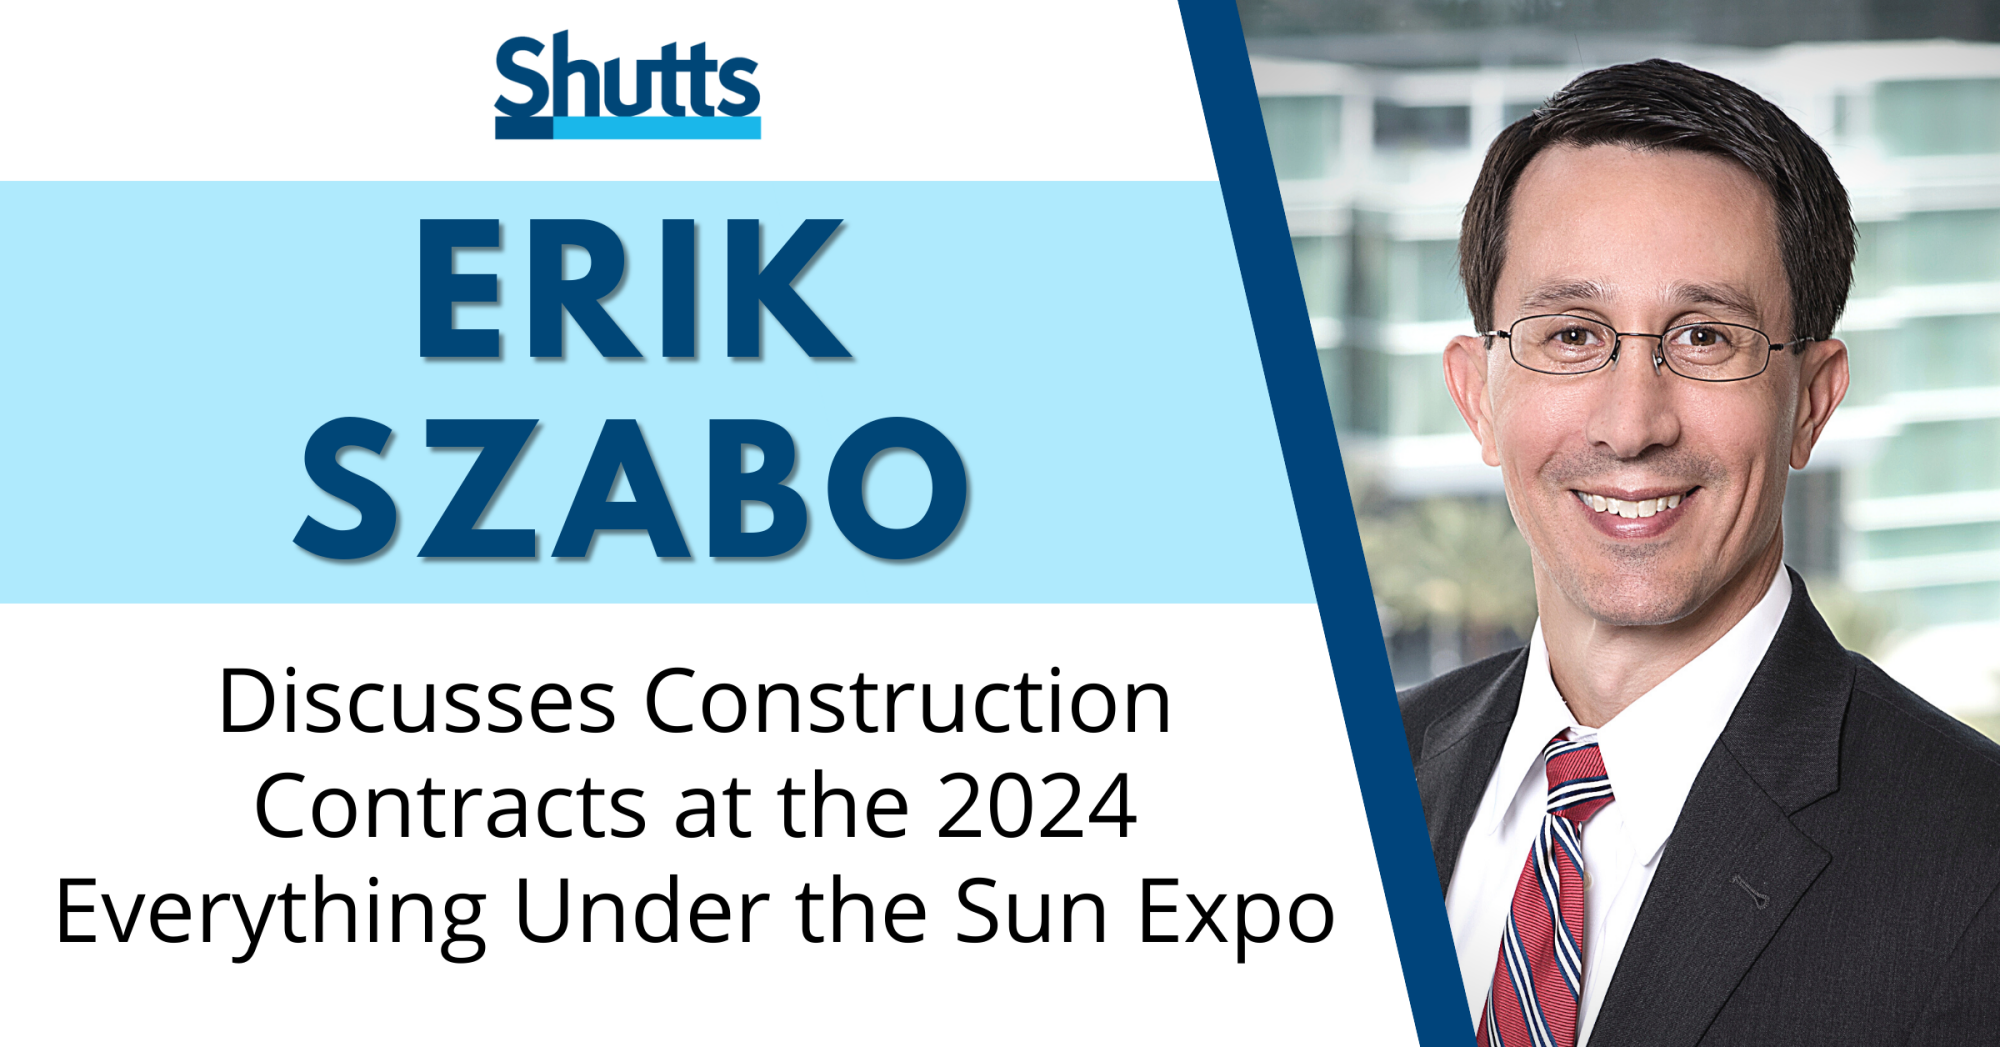 Erik Szabo Discusses Construction Contracts at the 2024 Everything Under the Sun Expo